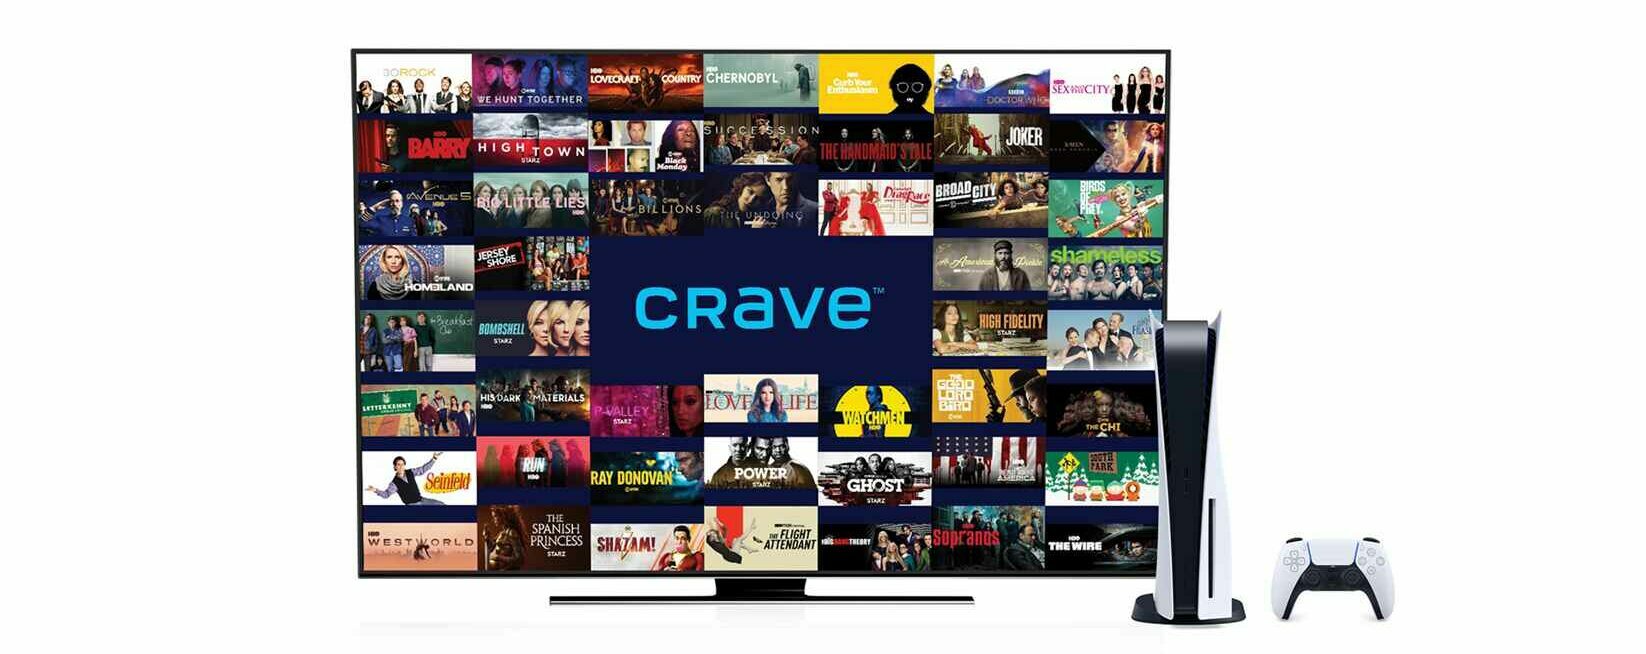 How to Activate Crave TV on Playstation